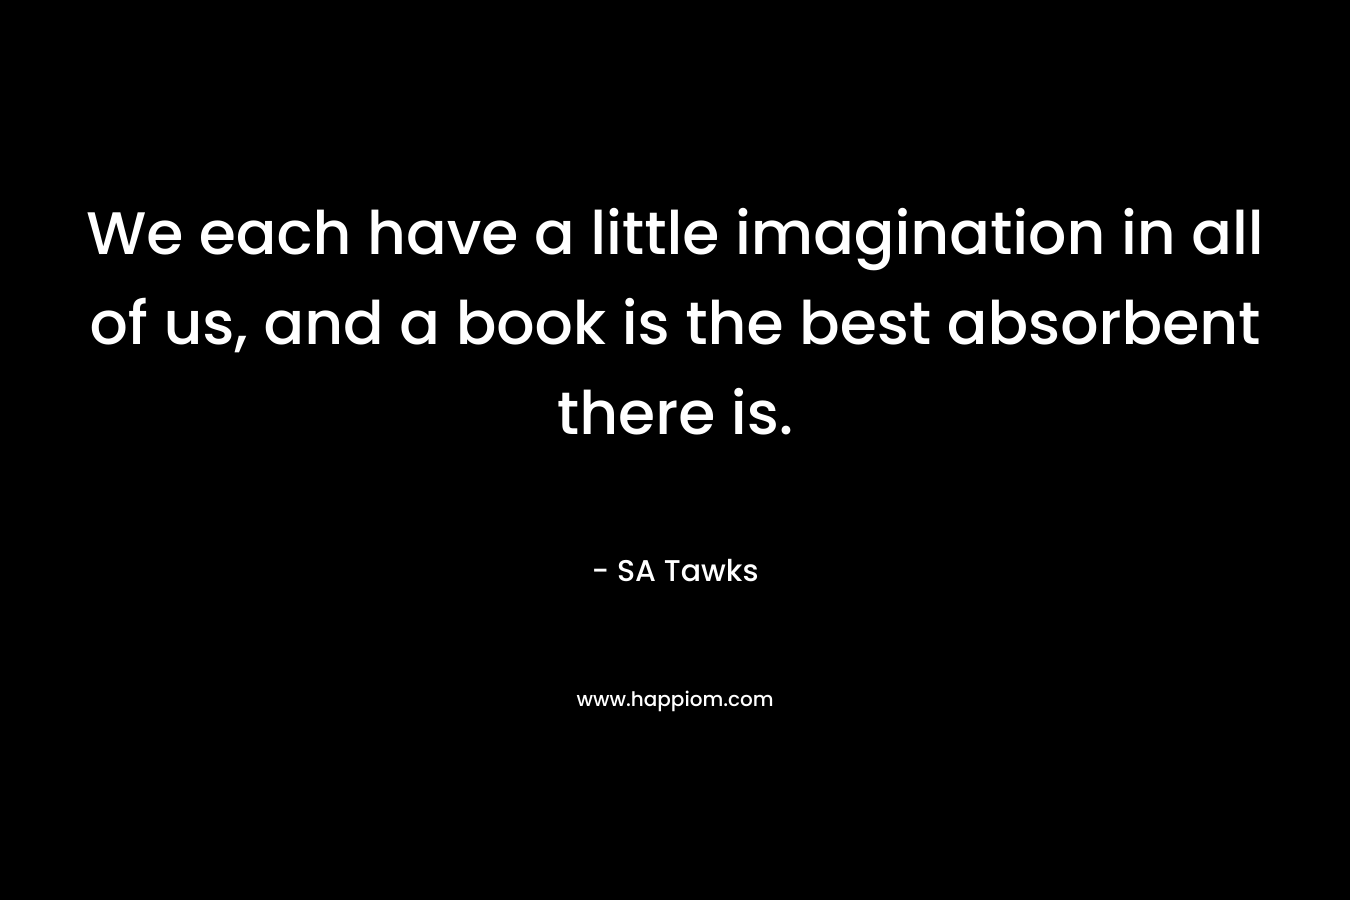 We each have a little imagination in all of us, and a book is the best absorbent there is.